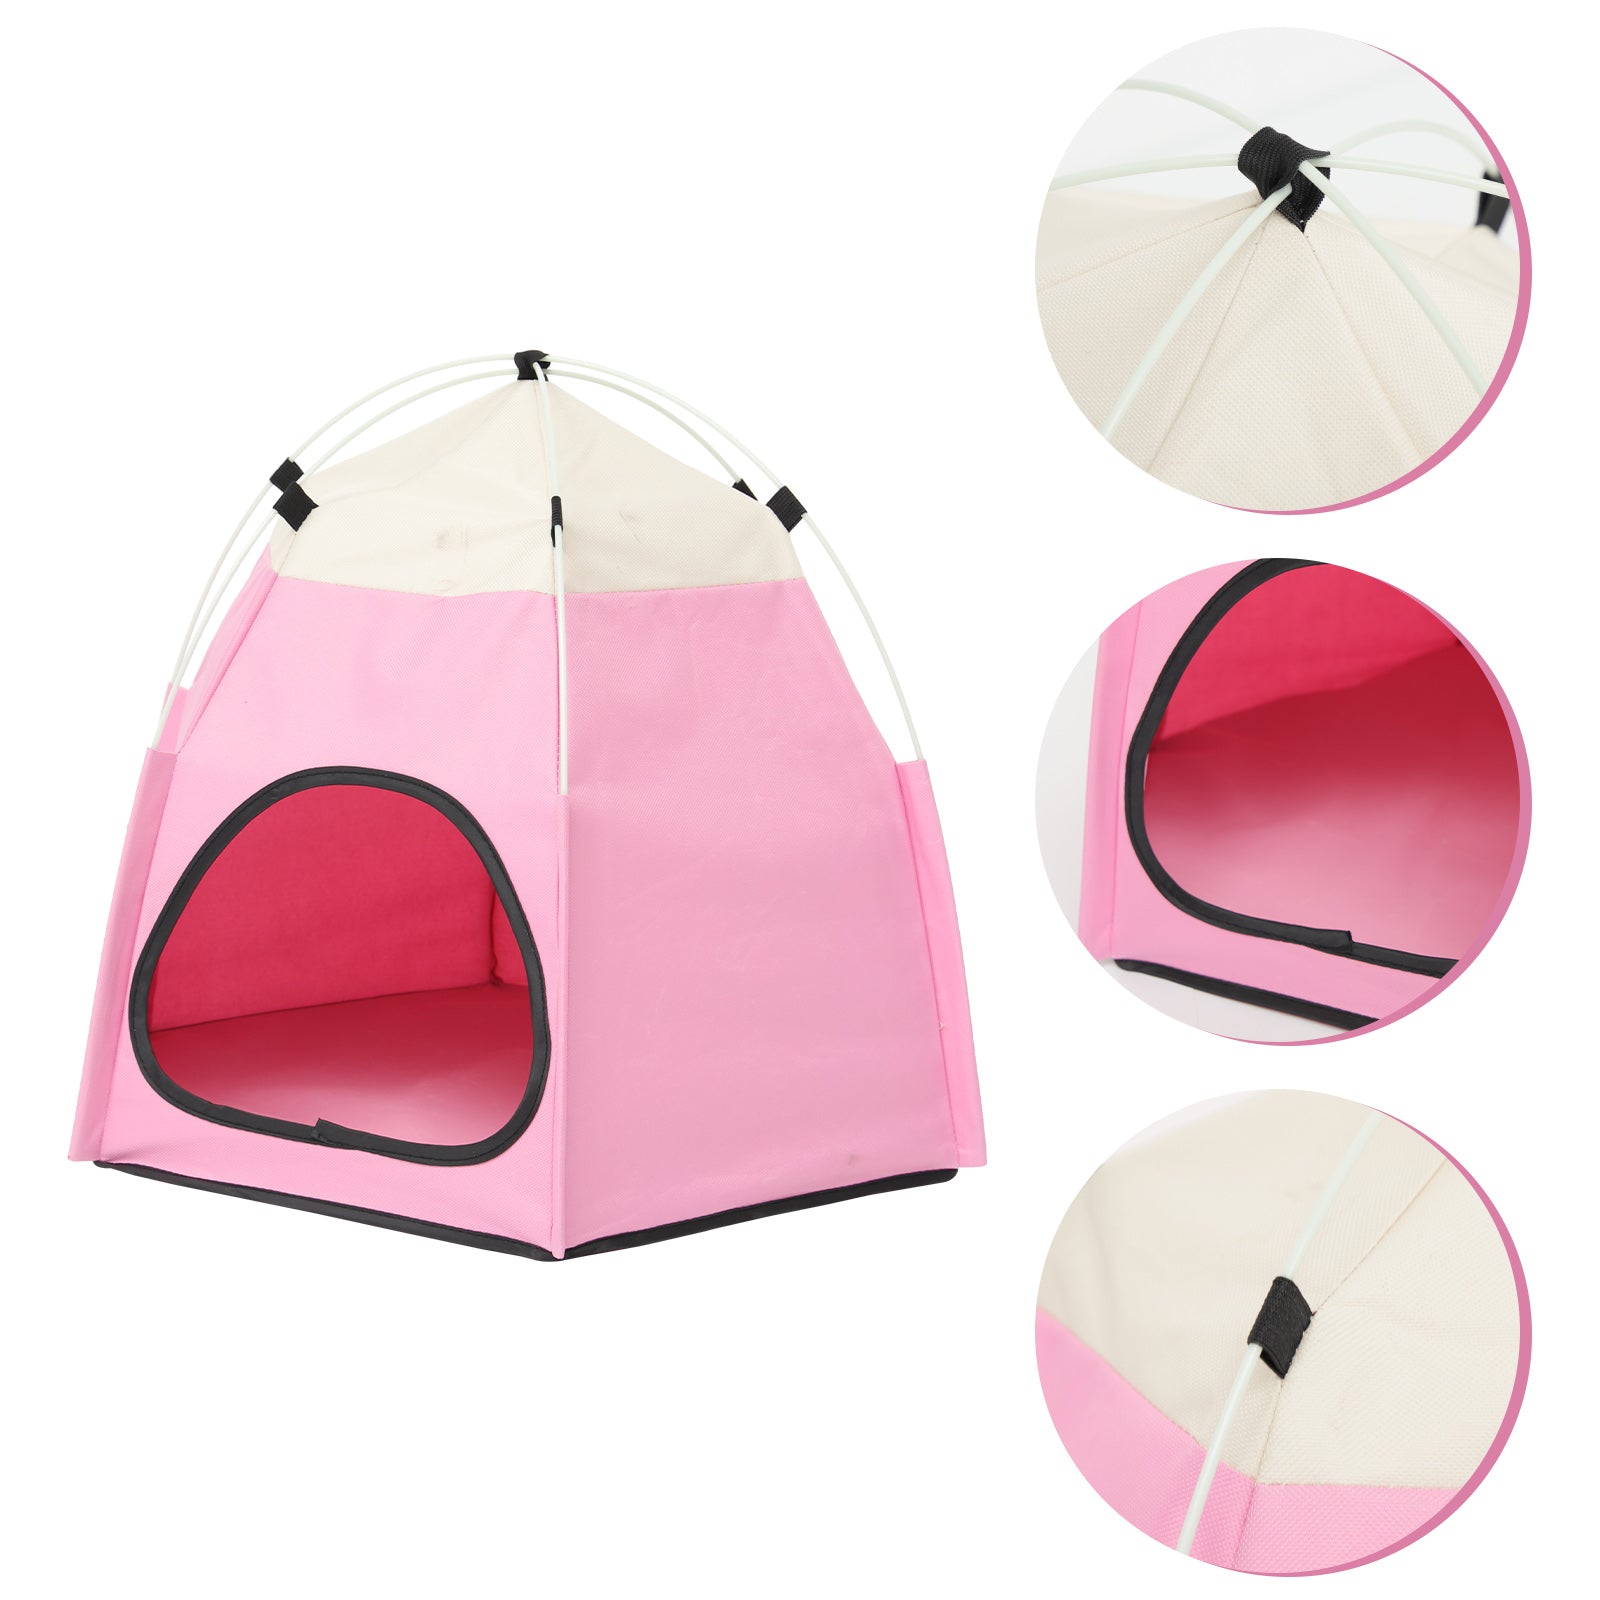 Tent Pet Dog Cat House Sleeping Bed TentIndoor Kittendecorative Adorable Household Comfortable Play Napping Foldable